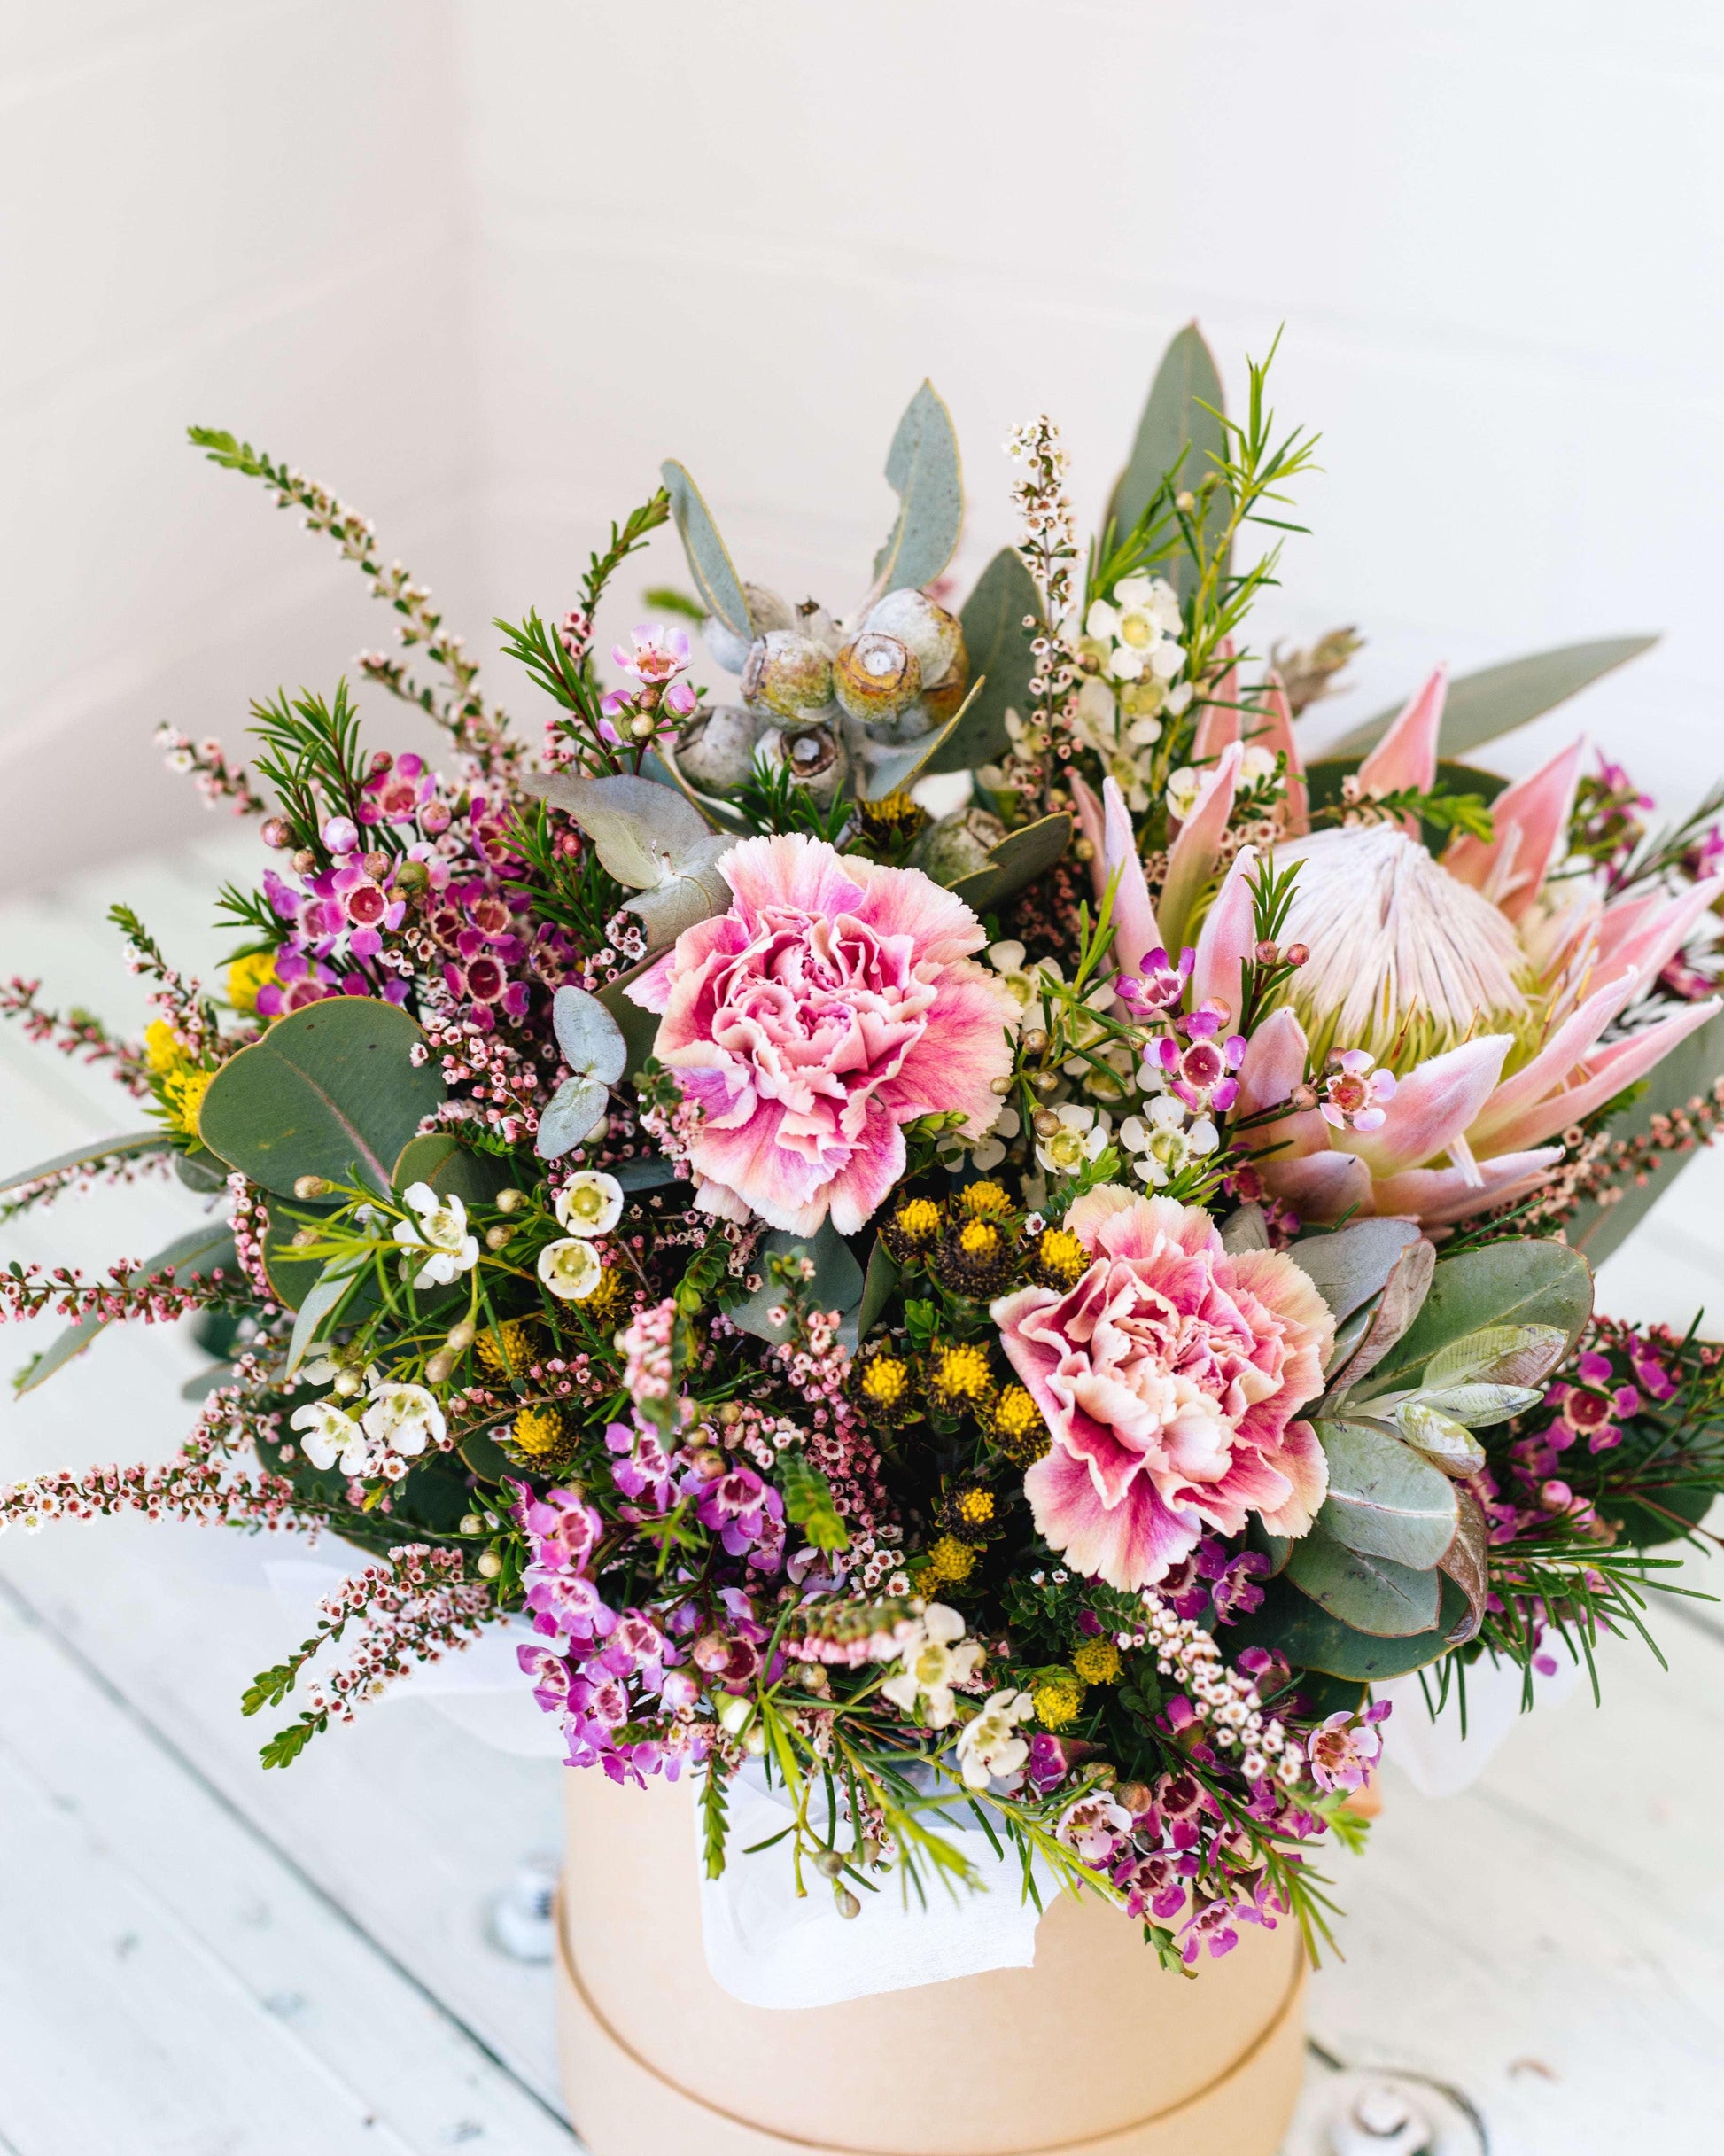 She-is-a-Wildflowers-a-stunning-arrangement-for-the-wild-hearted-smaill-size